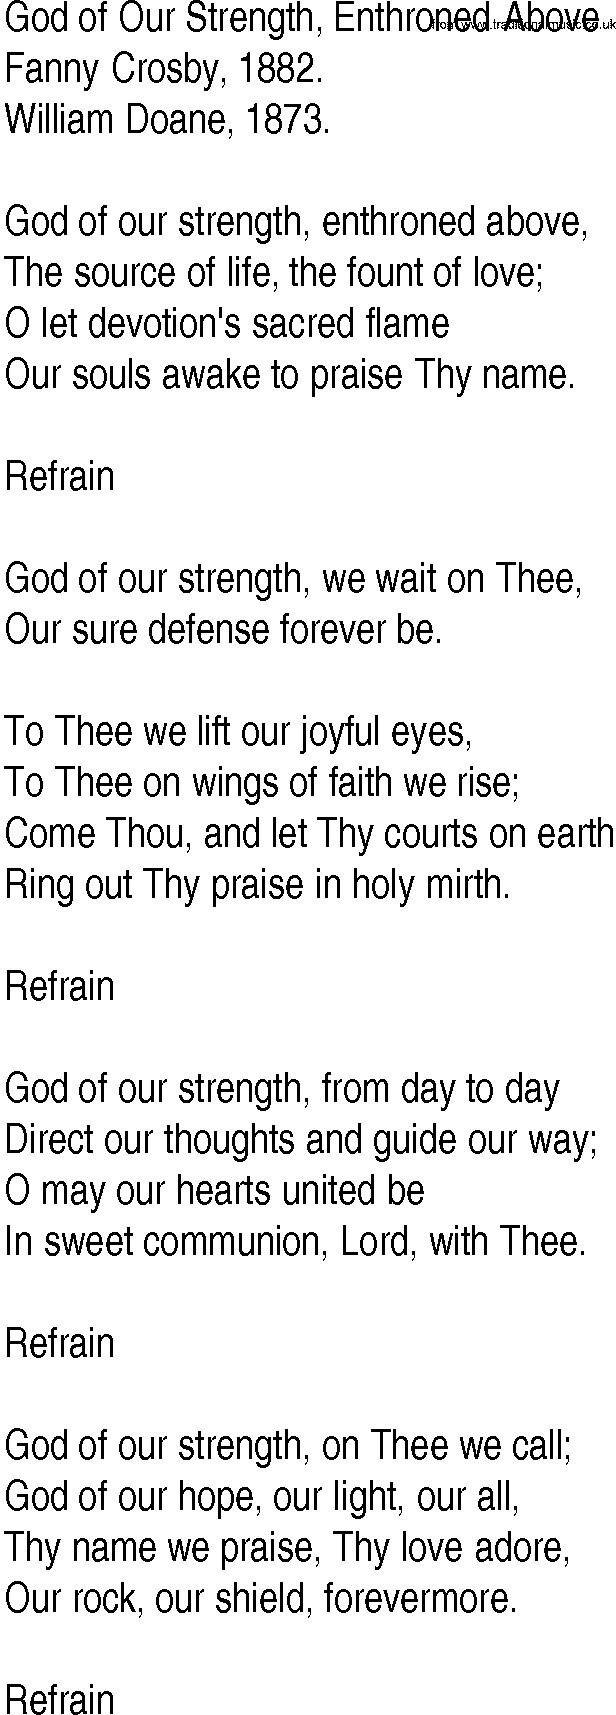 Hymn and Gospel Song: God of Our Strength, Enthroned Above by Fanny Crosby lyrics